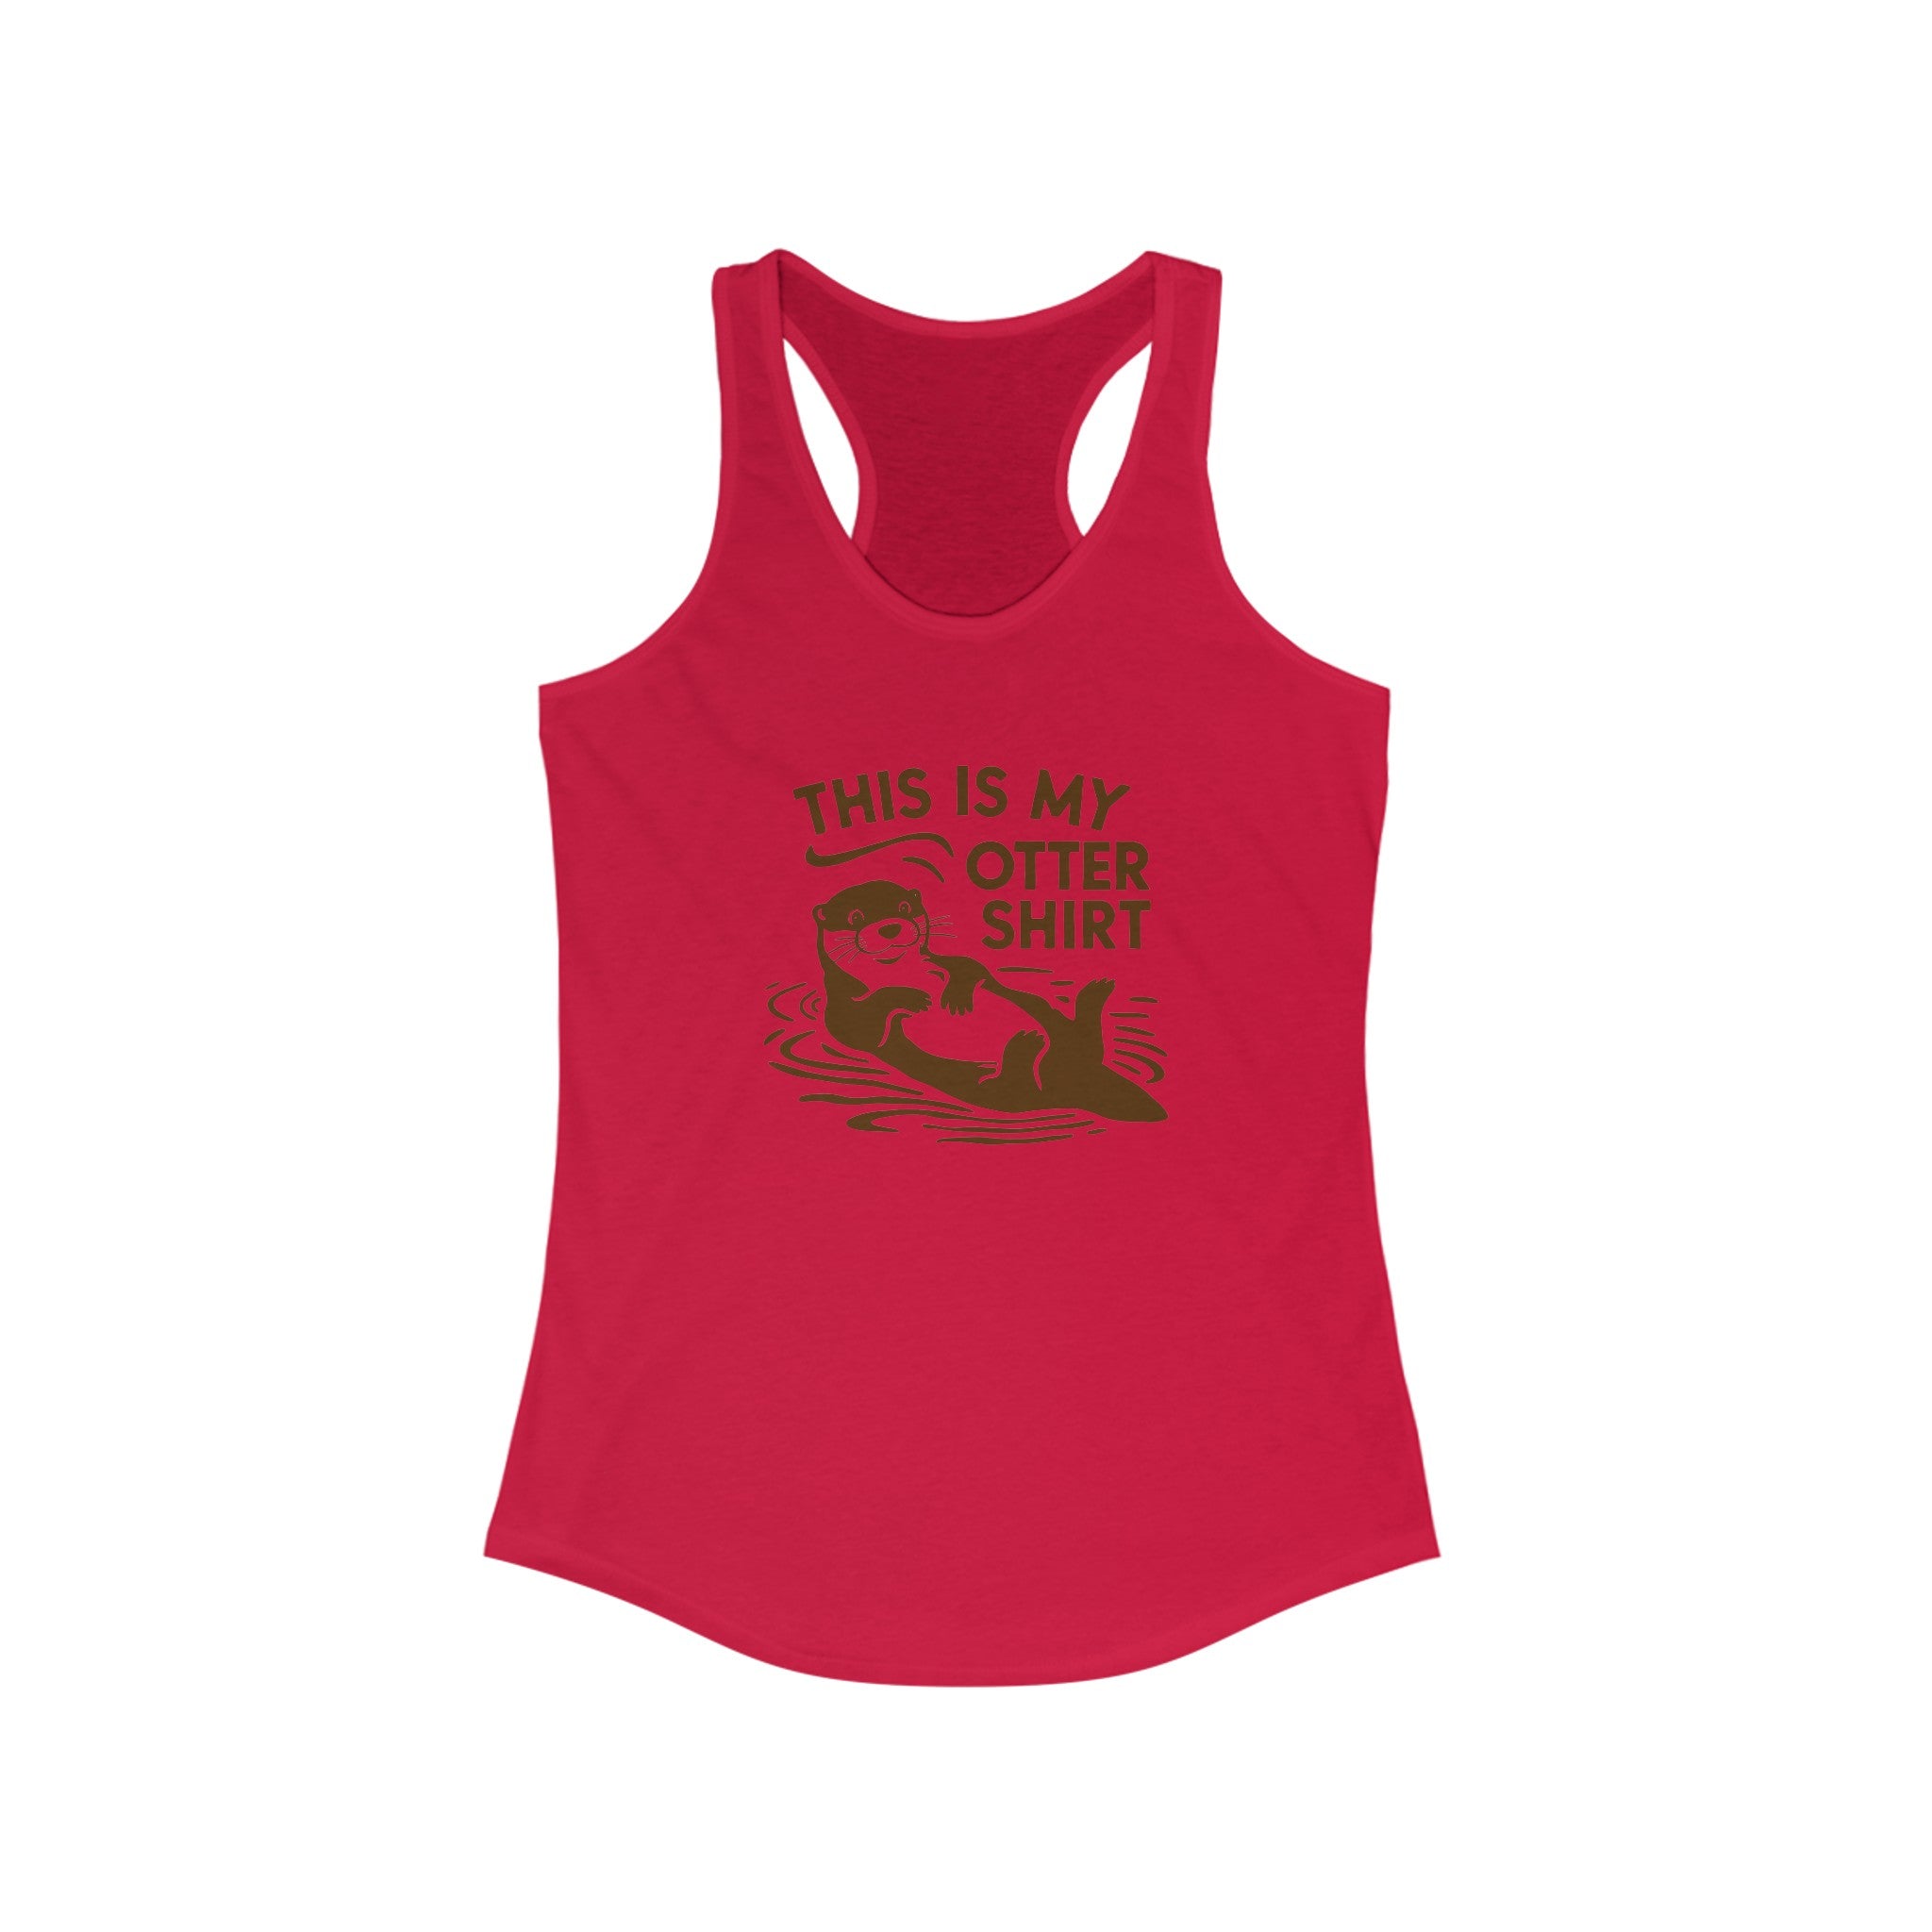 A red lightweight My Otter Shirt - Women's Racerback Tank featuring an illustration of an otter with the text "THIS IS MY OTTER SHIRT," perfect for your active lifestyle.